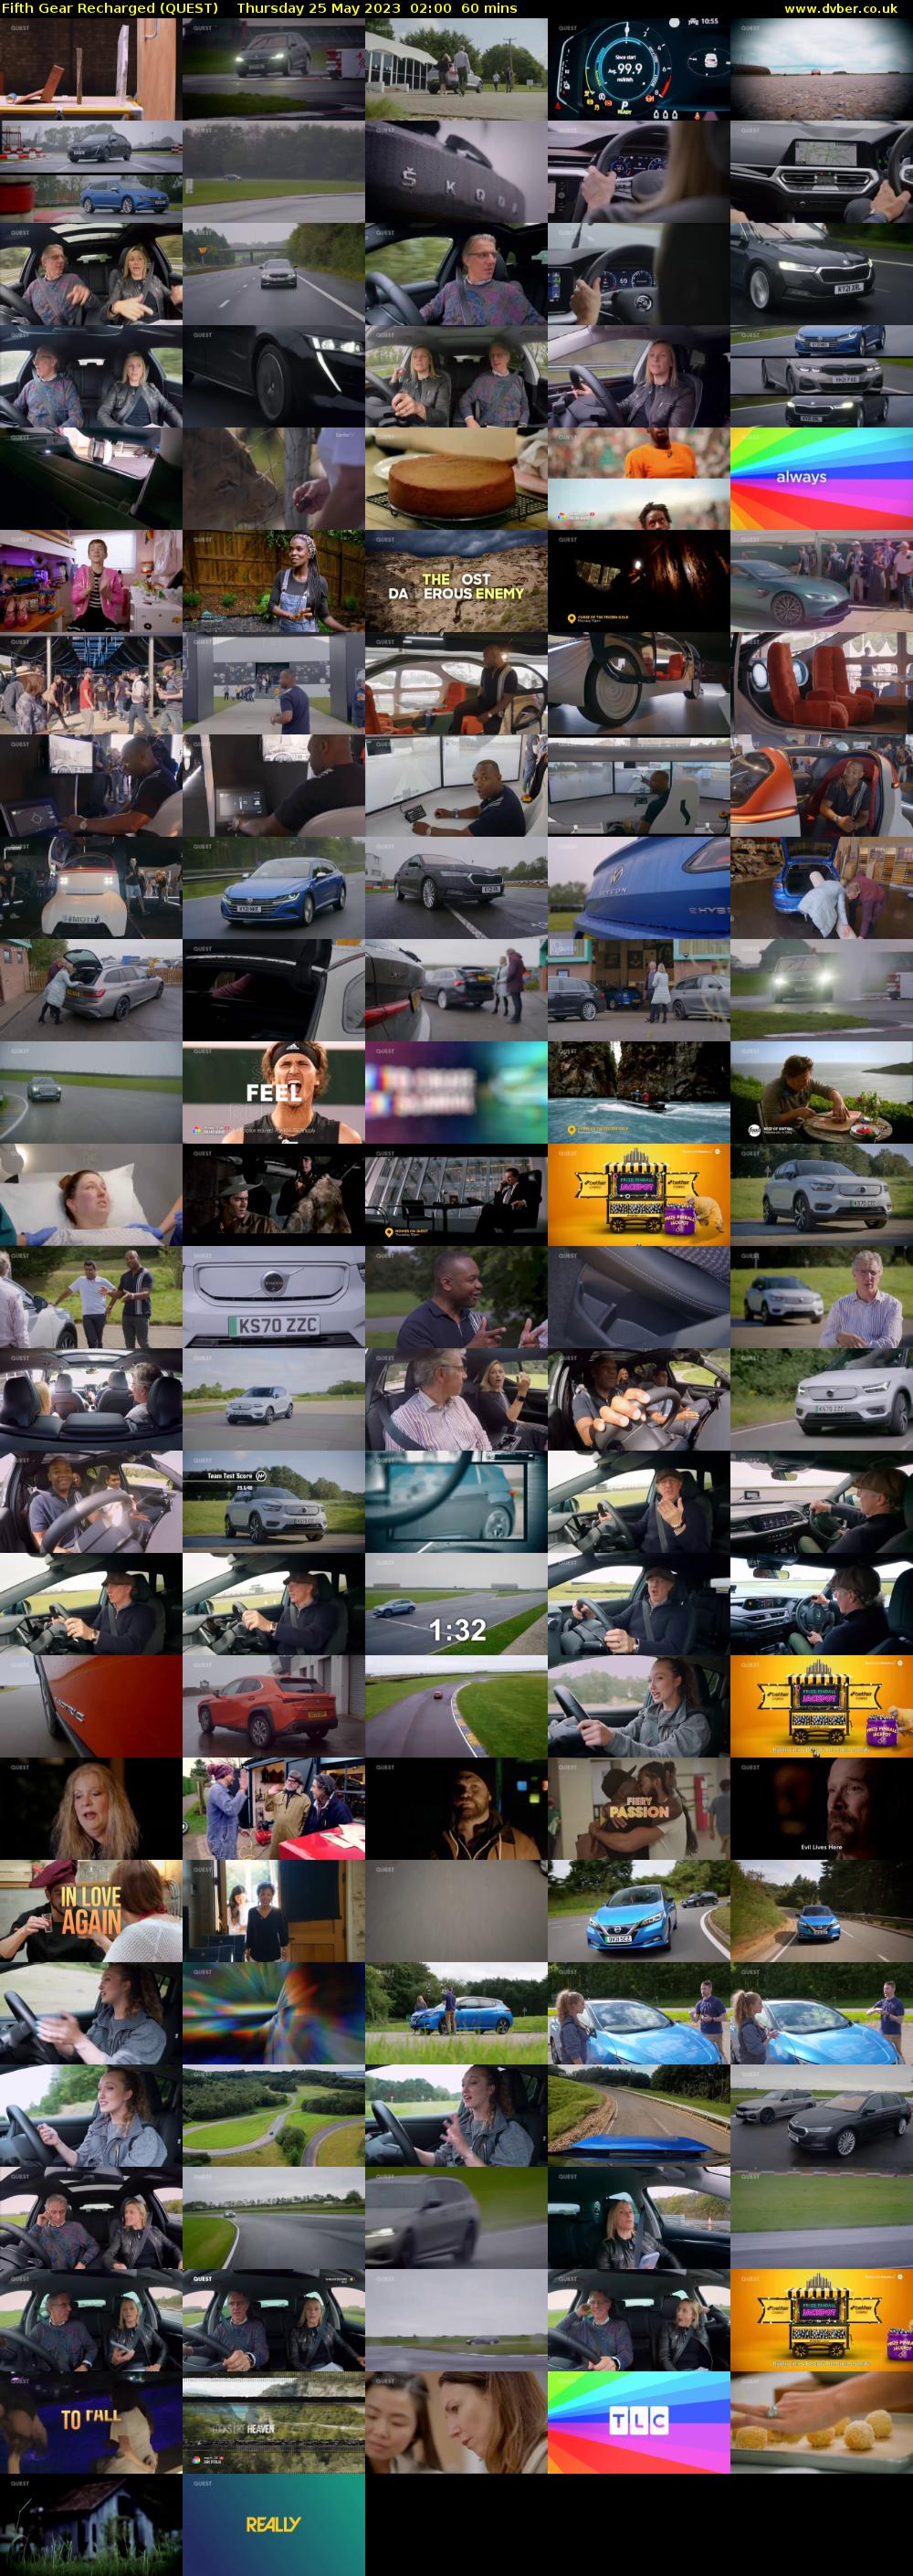 Fifth Gear Recharged (QUEST) Thursday 25 May 2023 02:00 - 03:00